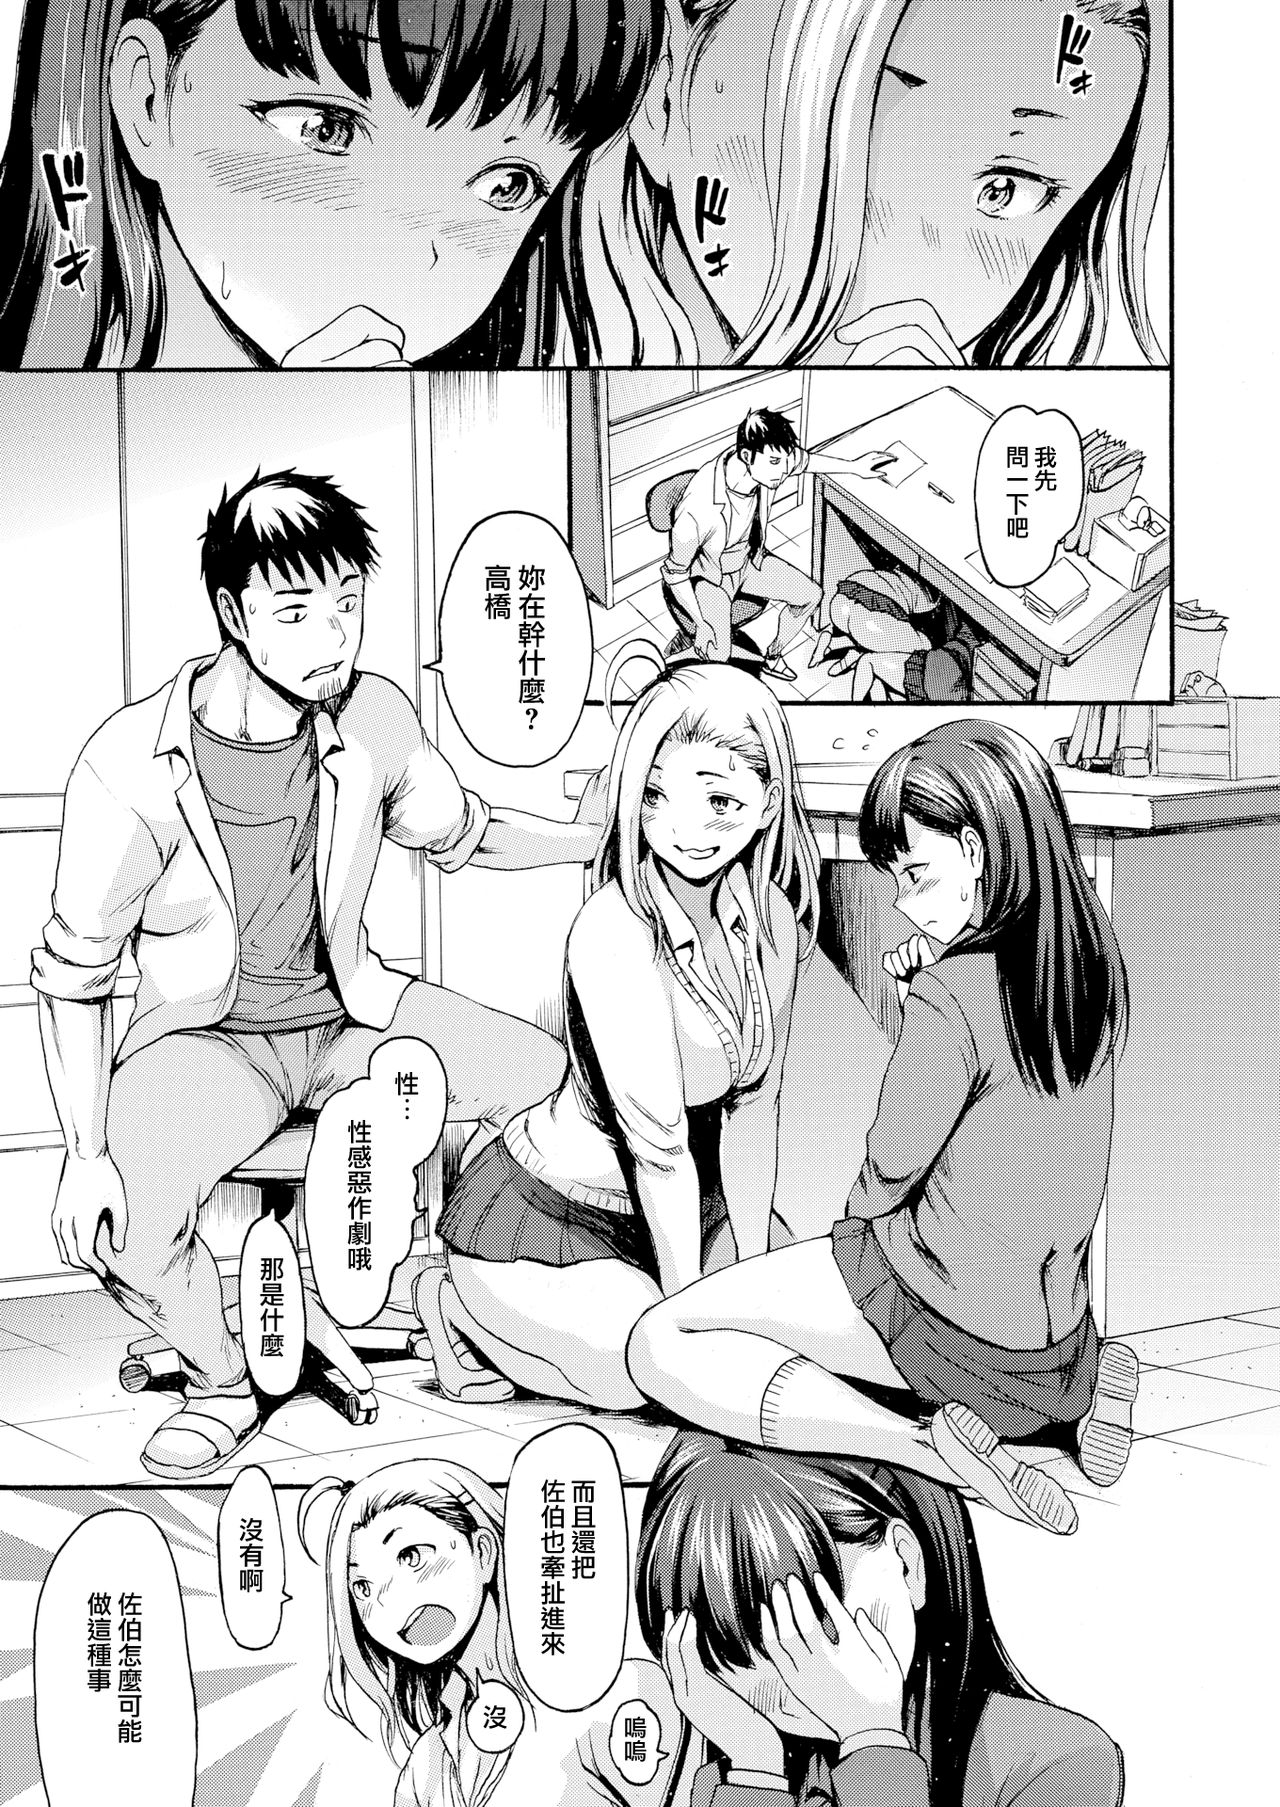 [E-Musu Aki] Dokkiri Mate - Do You Wanna SEX With Younger Pussy? (COMIC-X-EROS #61) [Chinese] [無邪気漢化組] [Digital] page 11 full